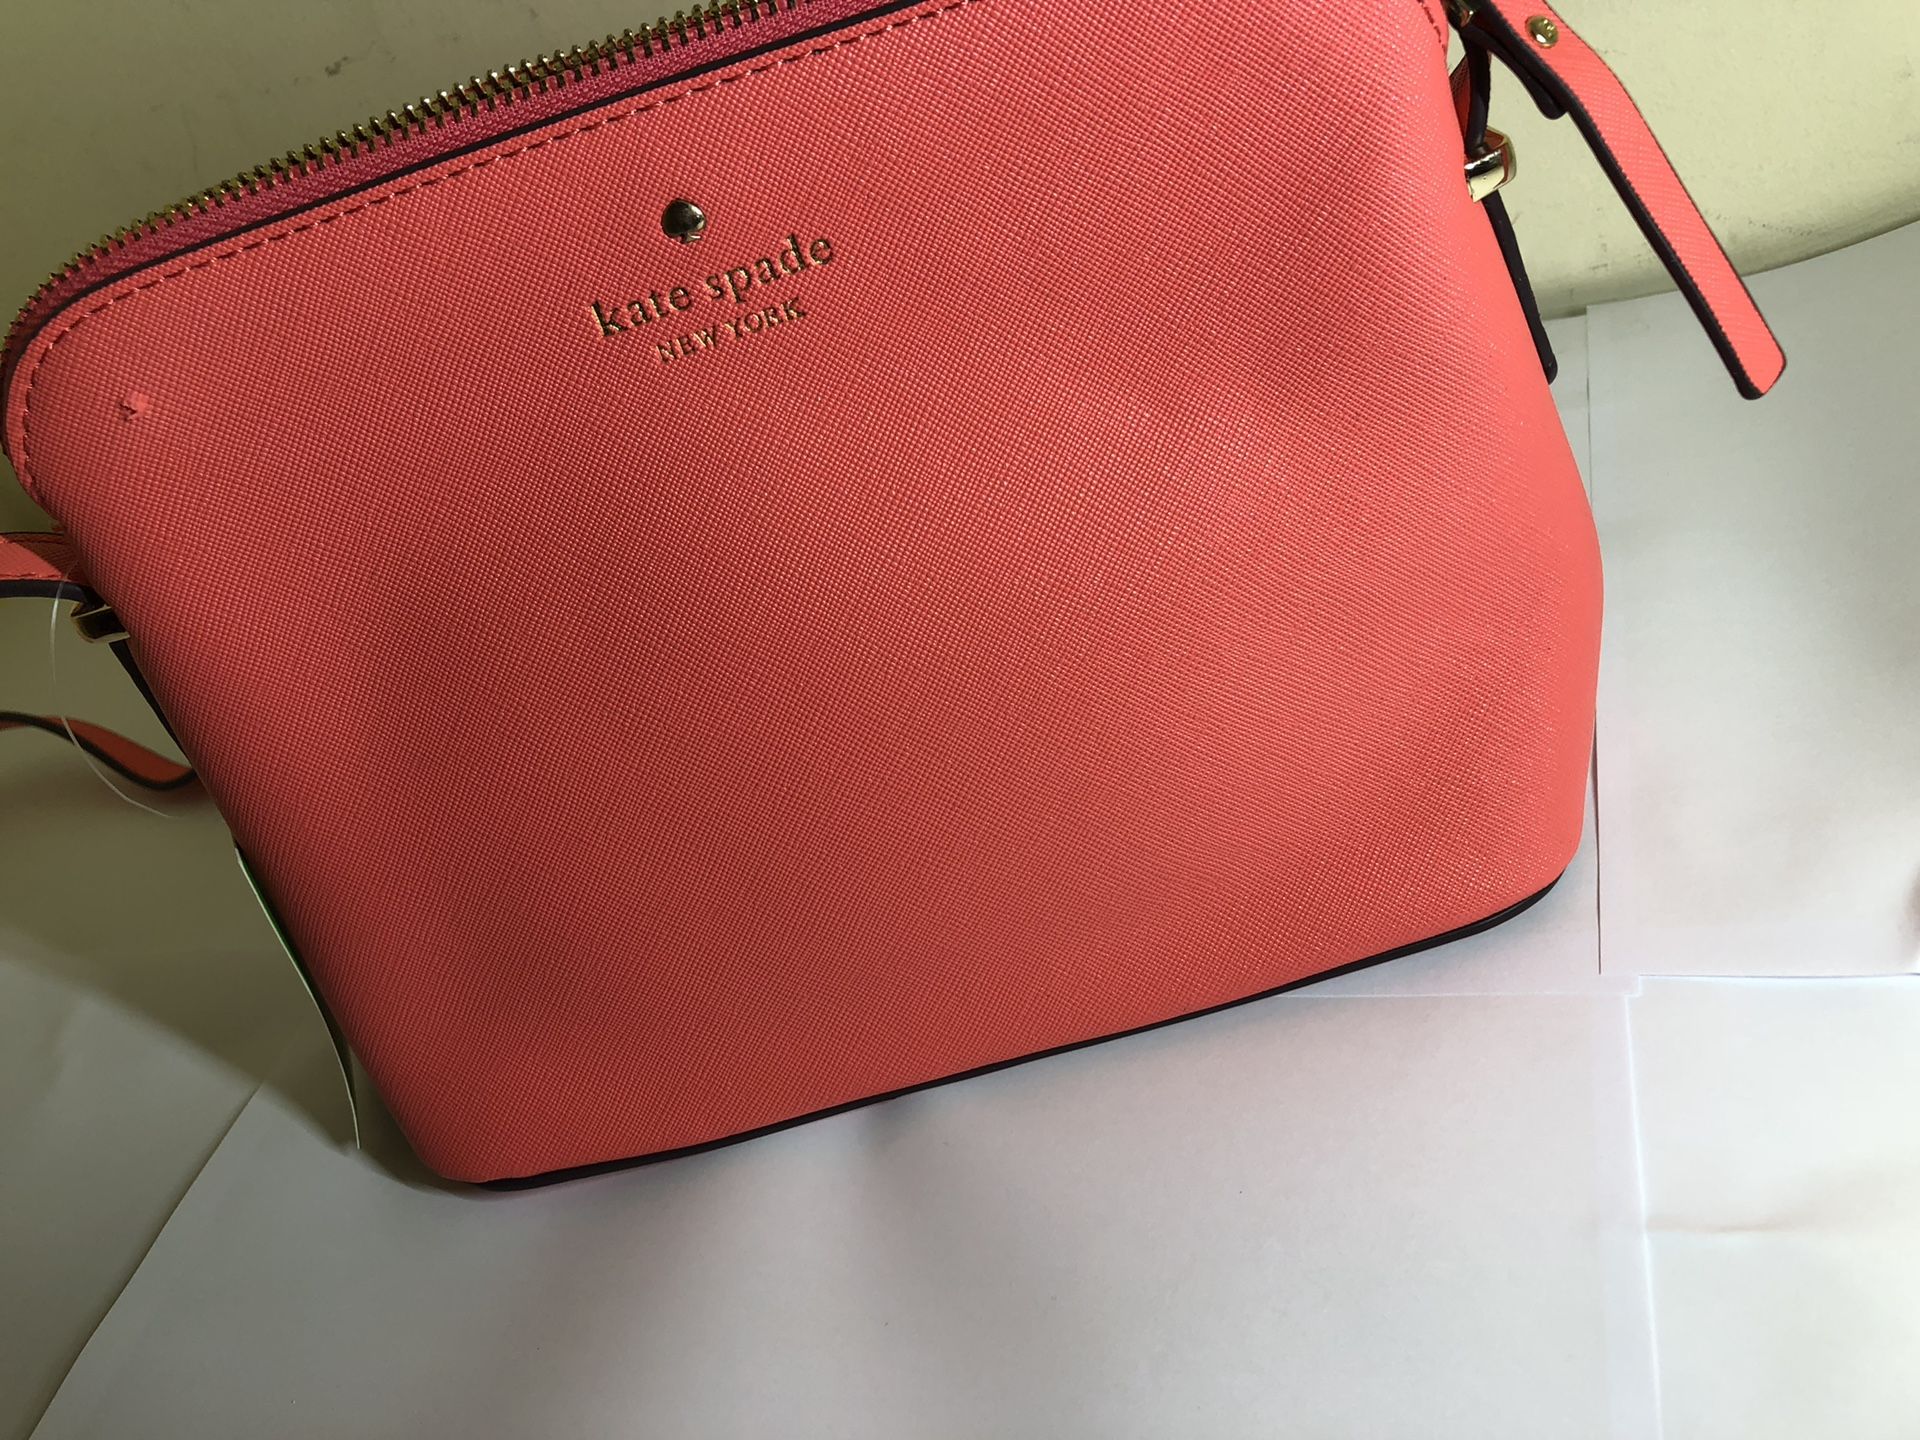 Kate Spade New York Purse WITH TAGS (SLIGHT DEFECT)